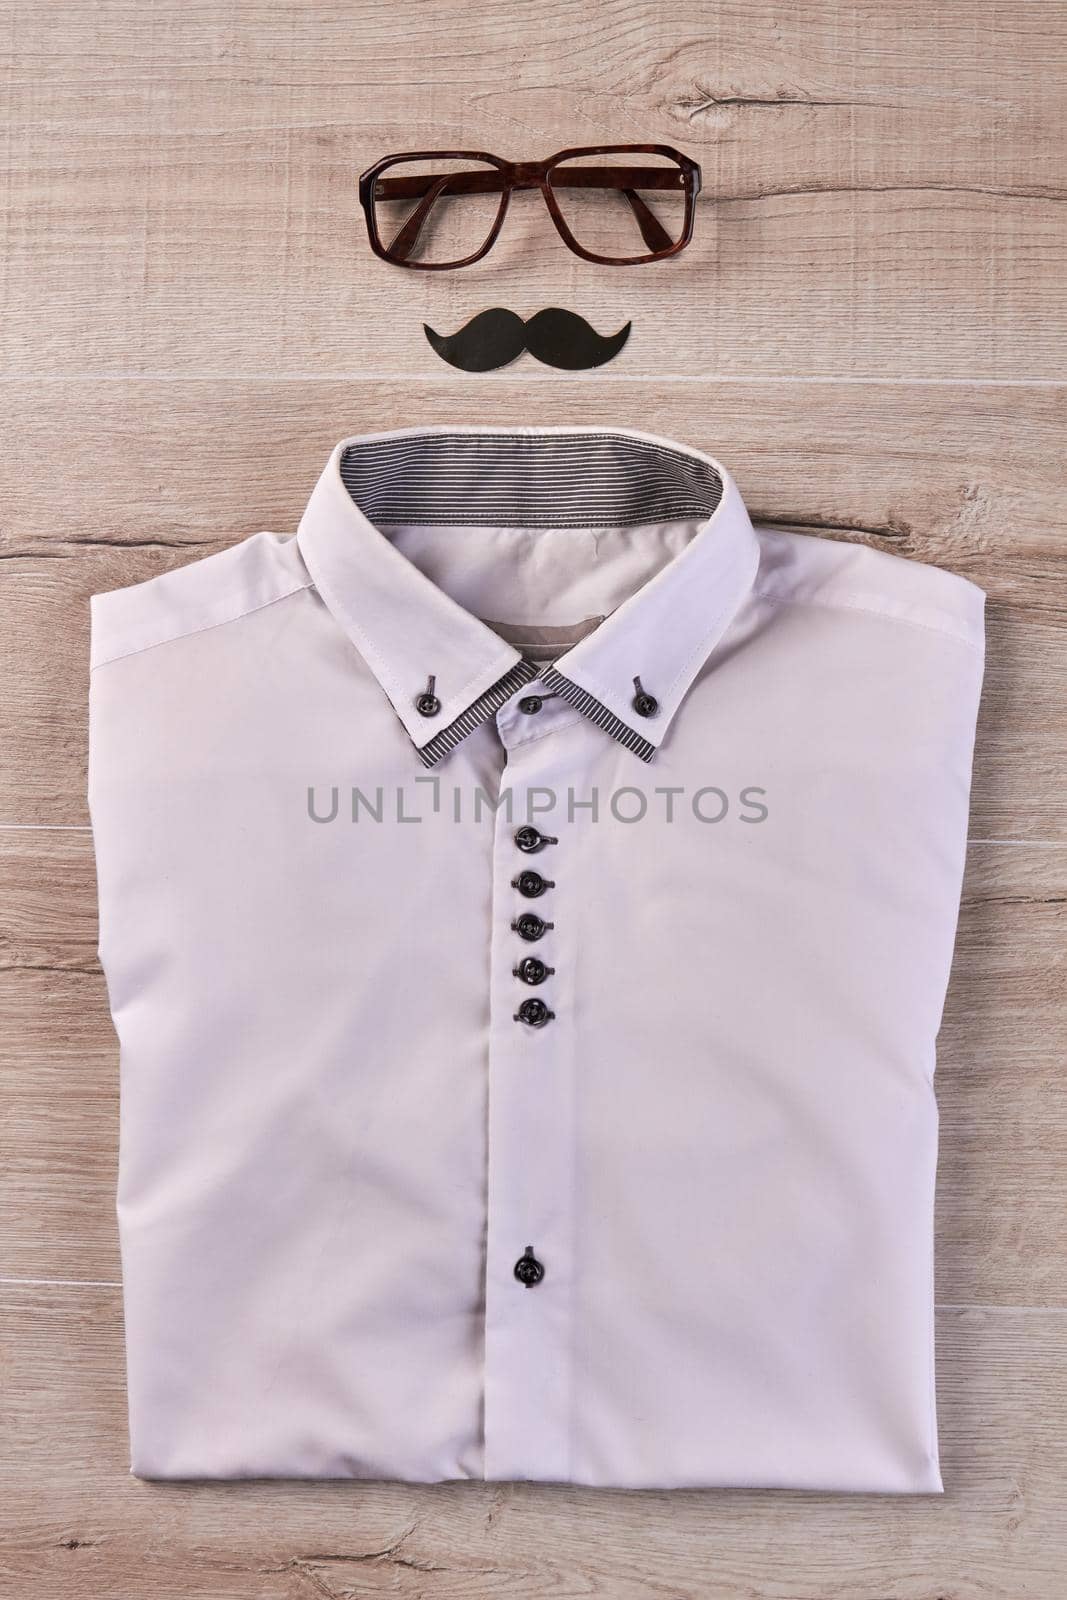 Hipster outfit with glasses and moustache on wooden desk. Top view flat lay.